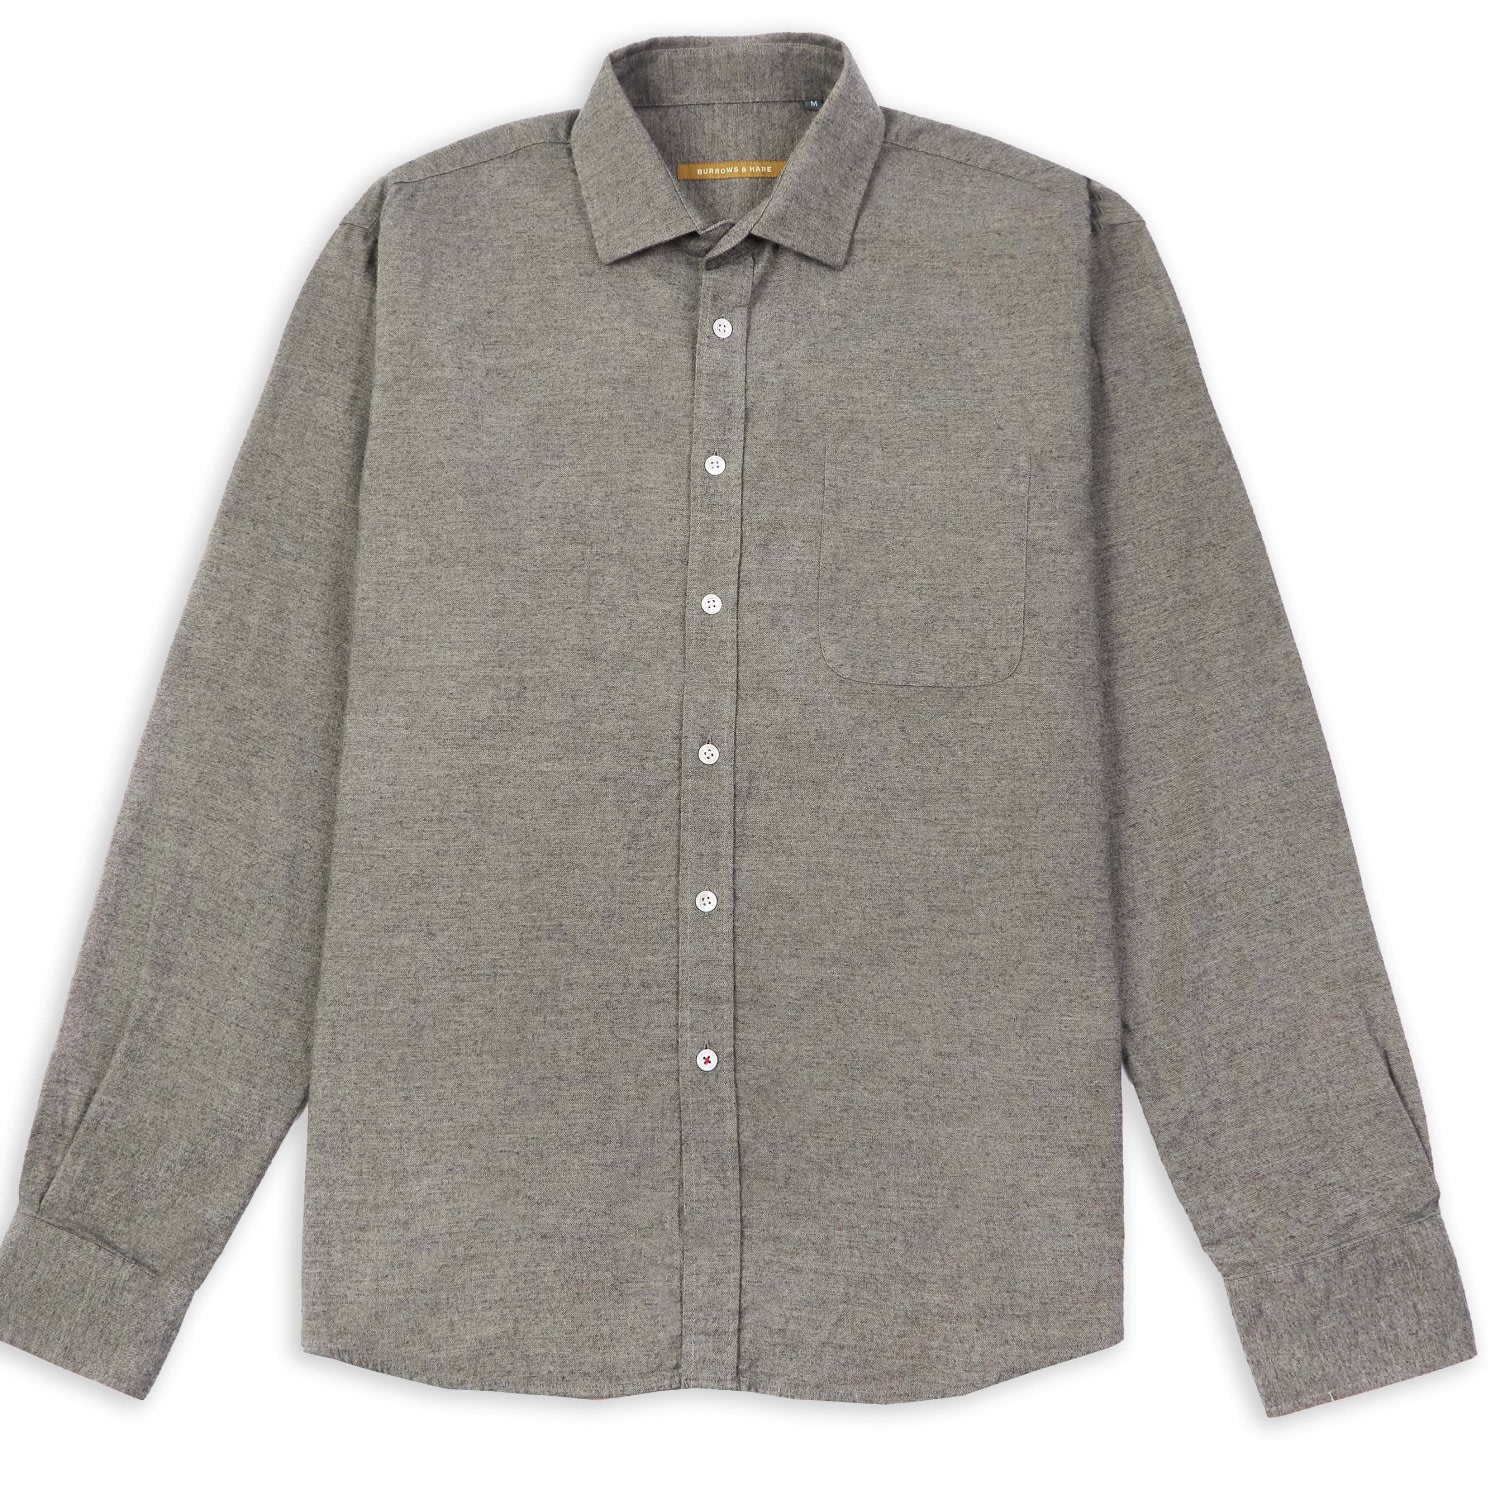 Burrows And Hare Men's Graphite Shirt -  Grey